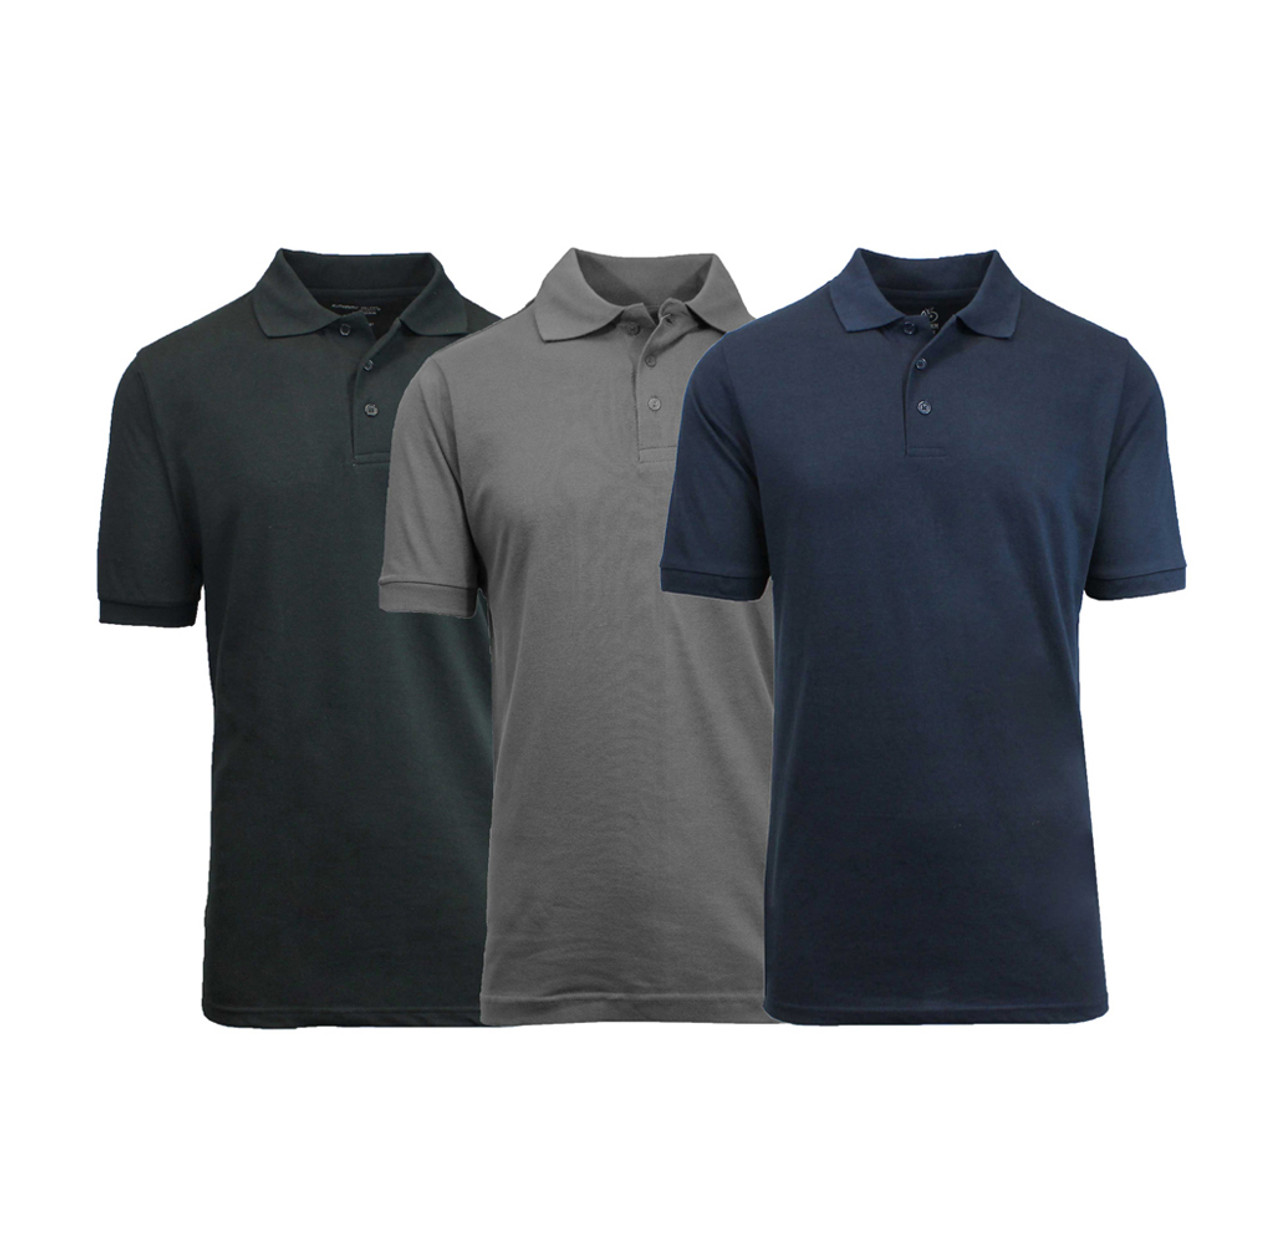 Men's Slim Fit Pique Polo Shirts (3-Pack) product image